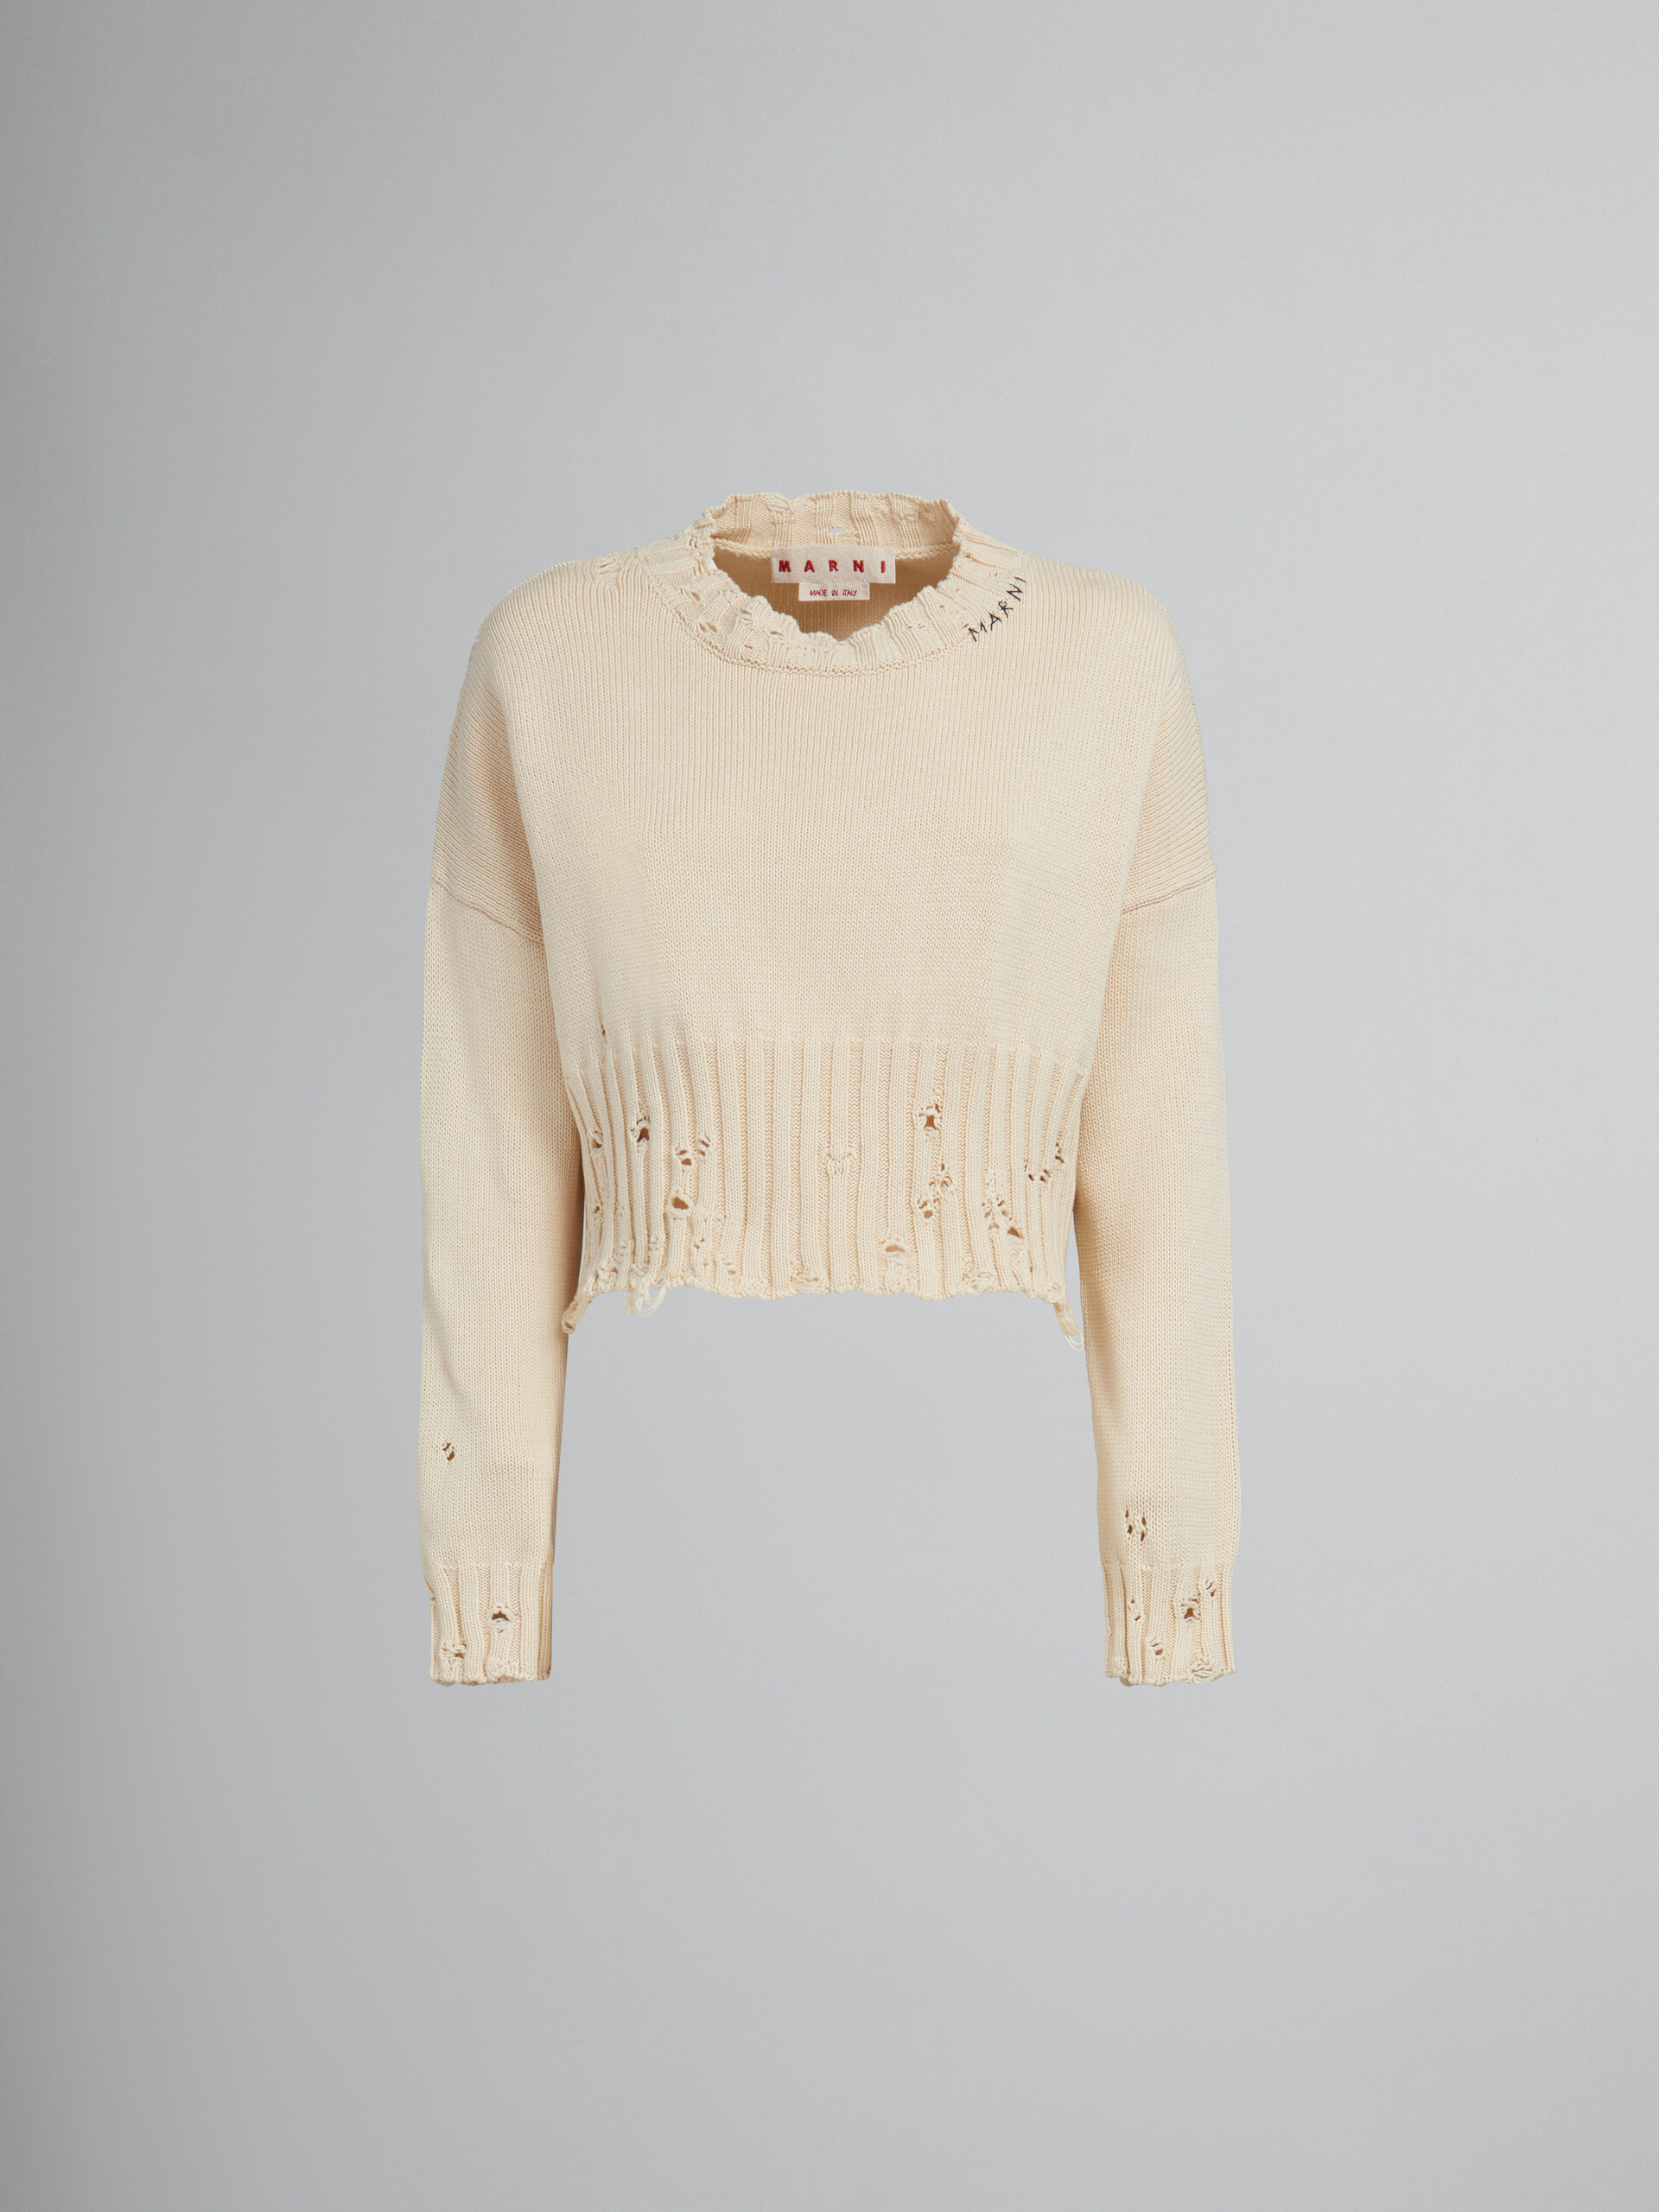 White cotton cropped sweater - Pullovers - Image 1